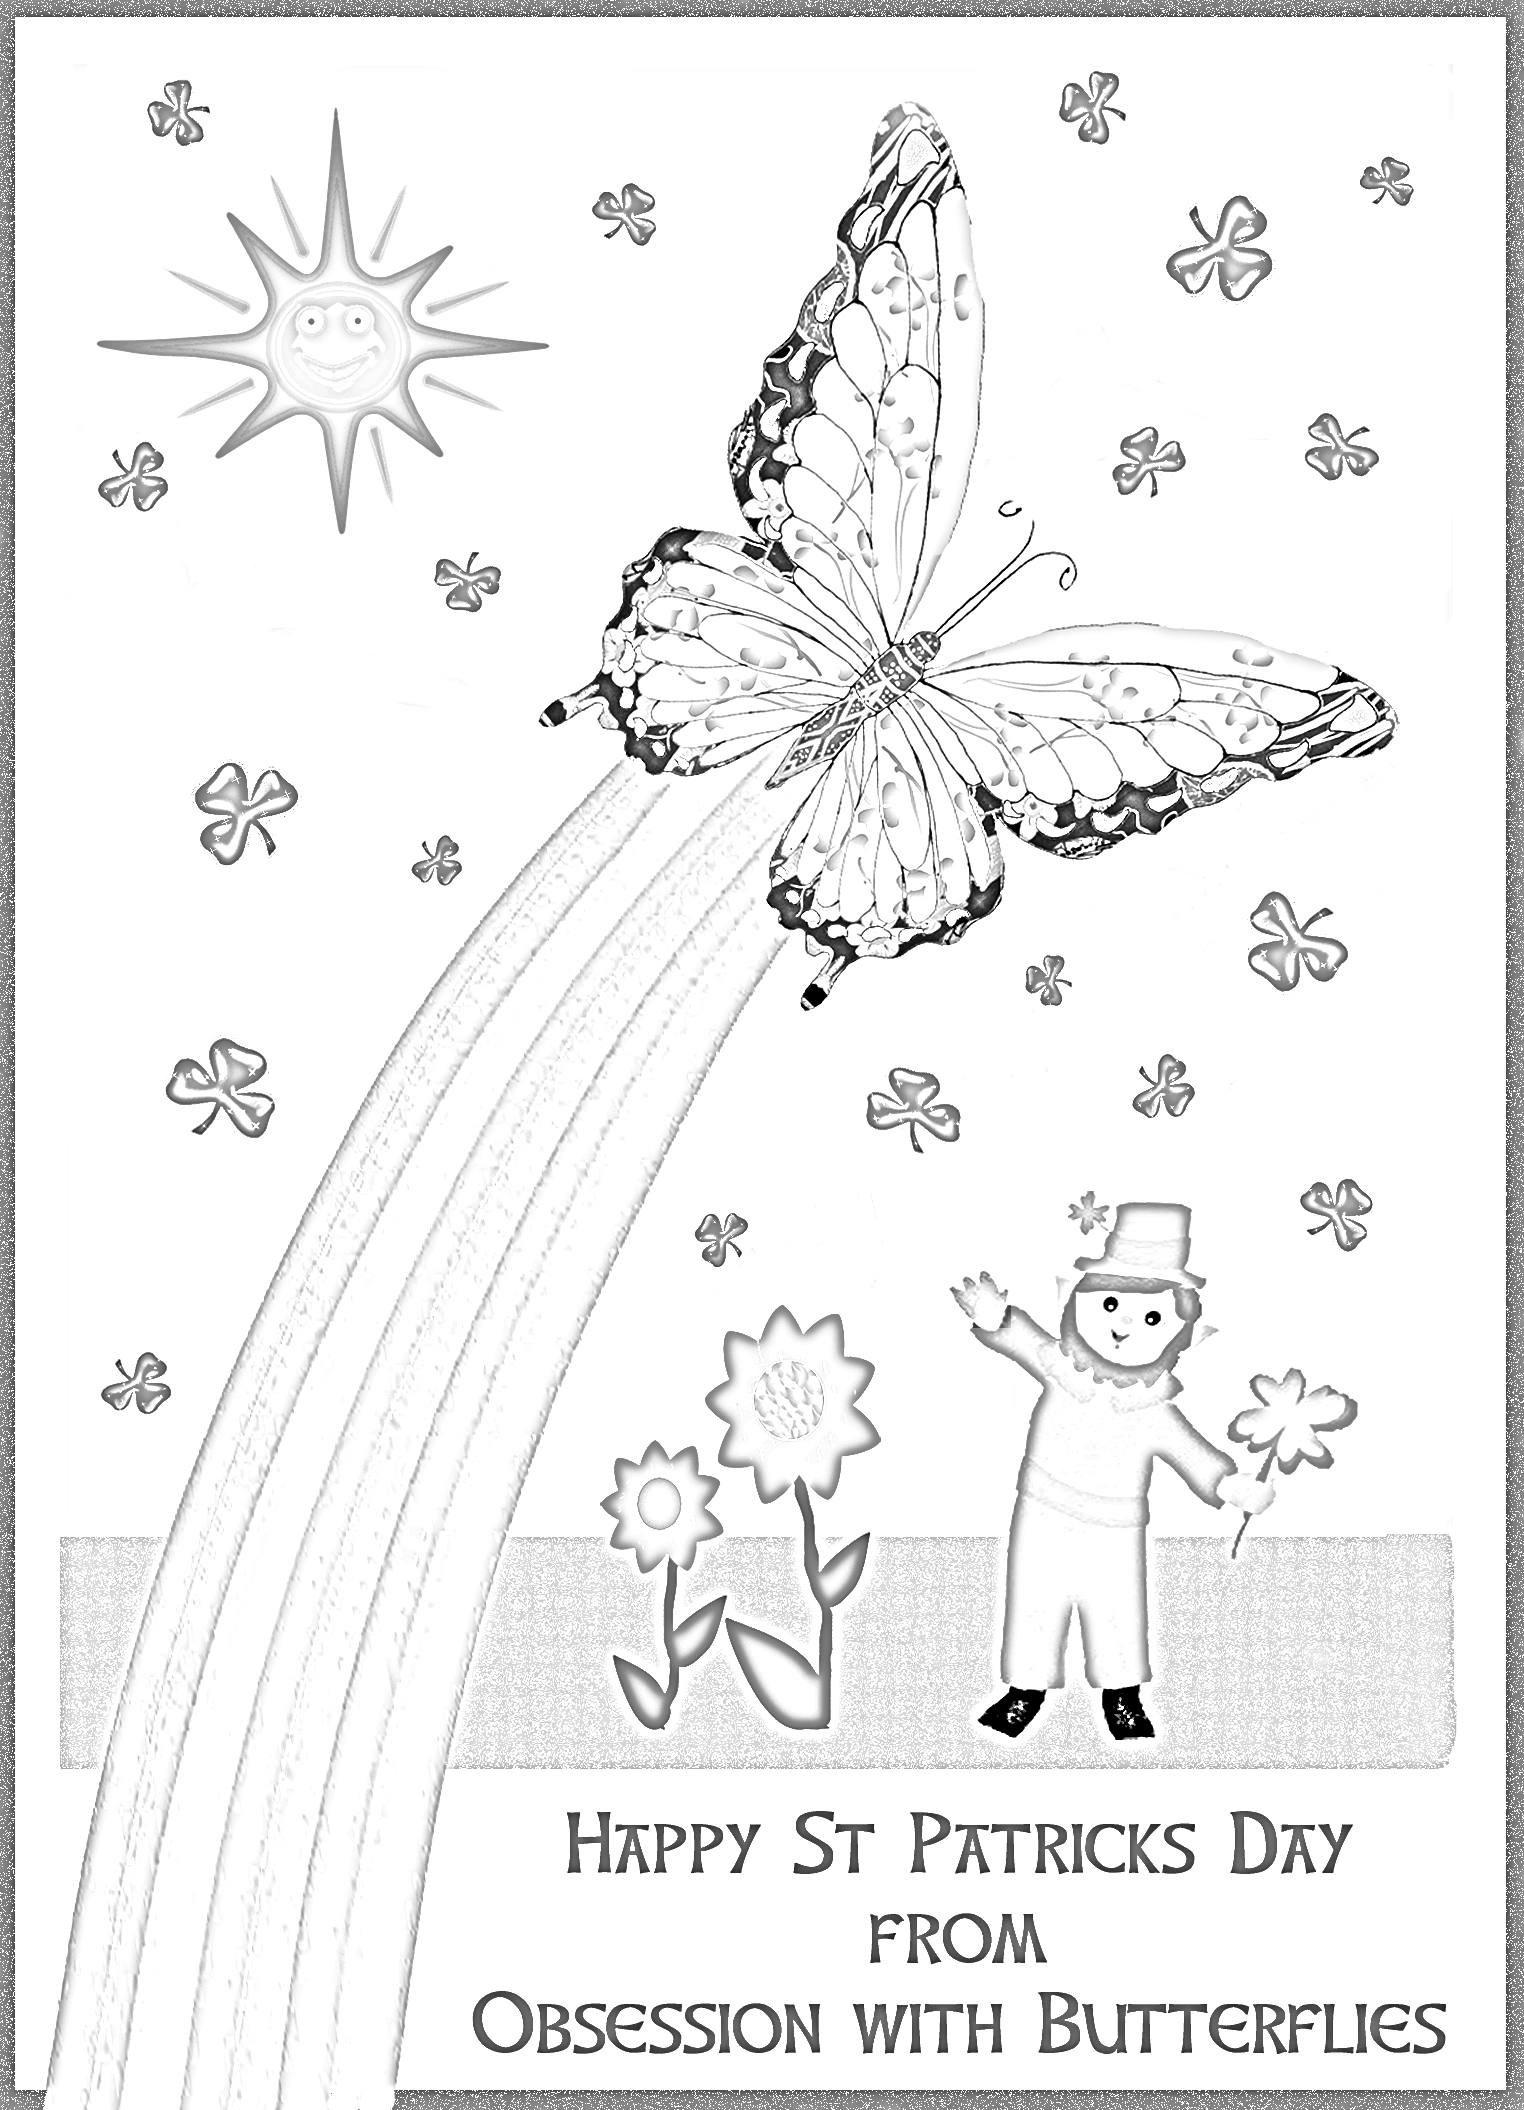 Rainbow Butterfly coloring, Download Rainbow Butterfly coloring for